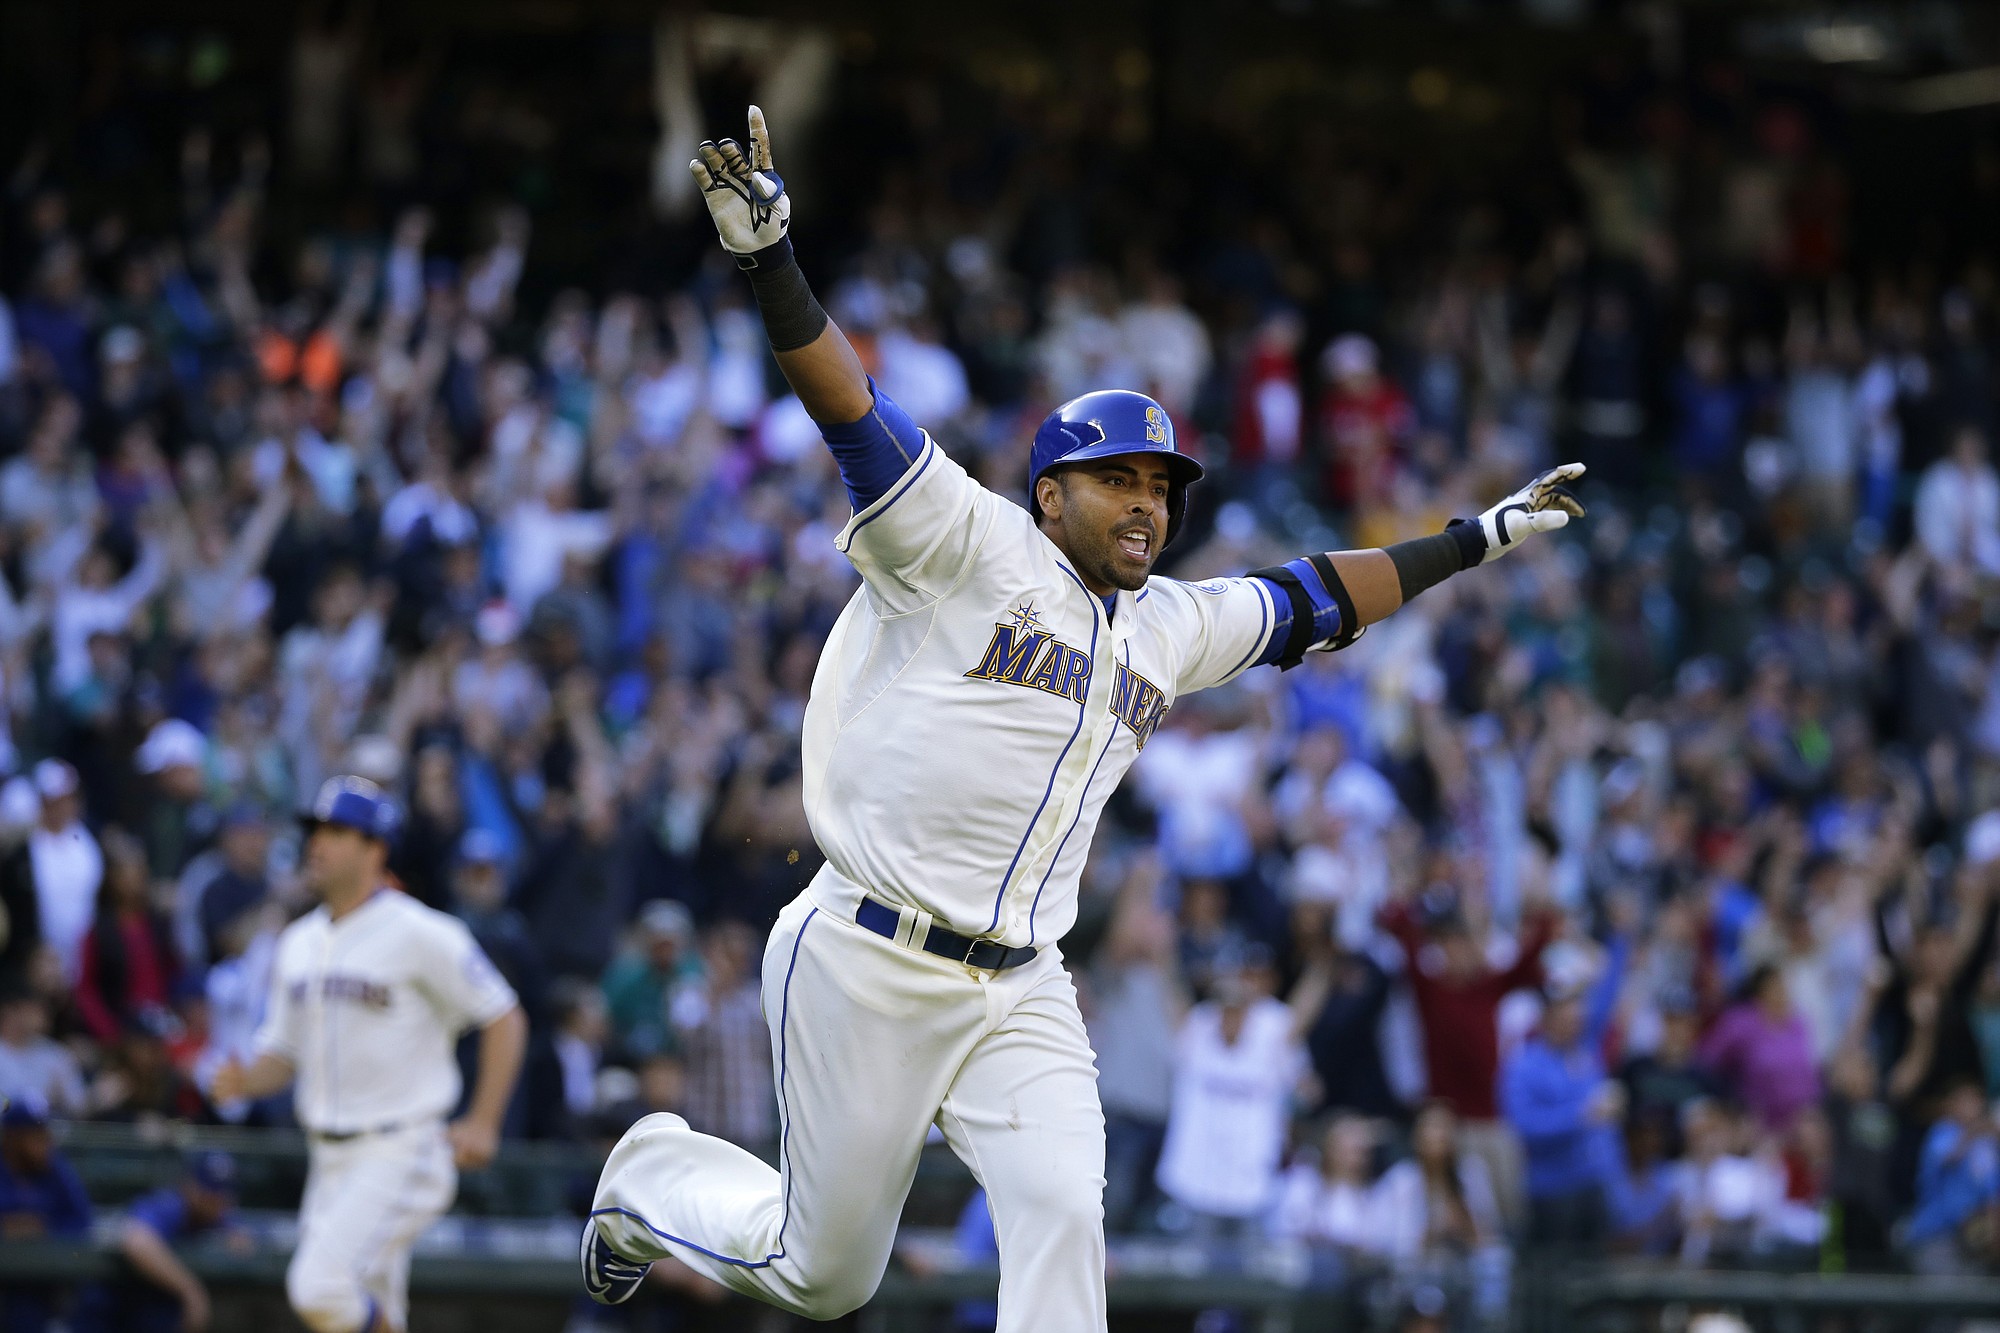 Seattle Mariners' Nelson Cruz celebrates after he hit a walk-off RBI single in the ninth inning to score Seth Smith and give the Mariners a 11-10 win over the Texas Rangers, on Sunday, April 19, 2015, in Seattle. (AP Photo/Ted S.